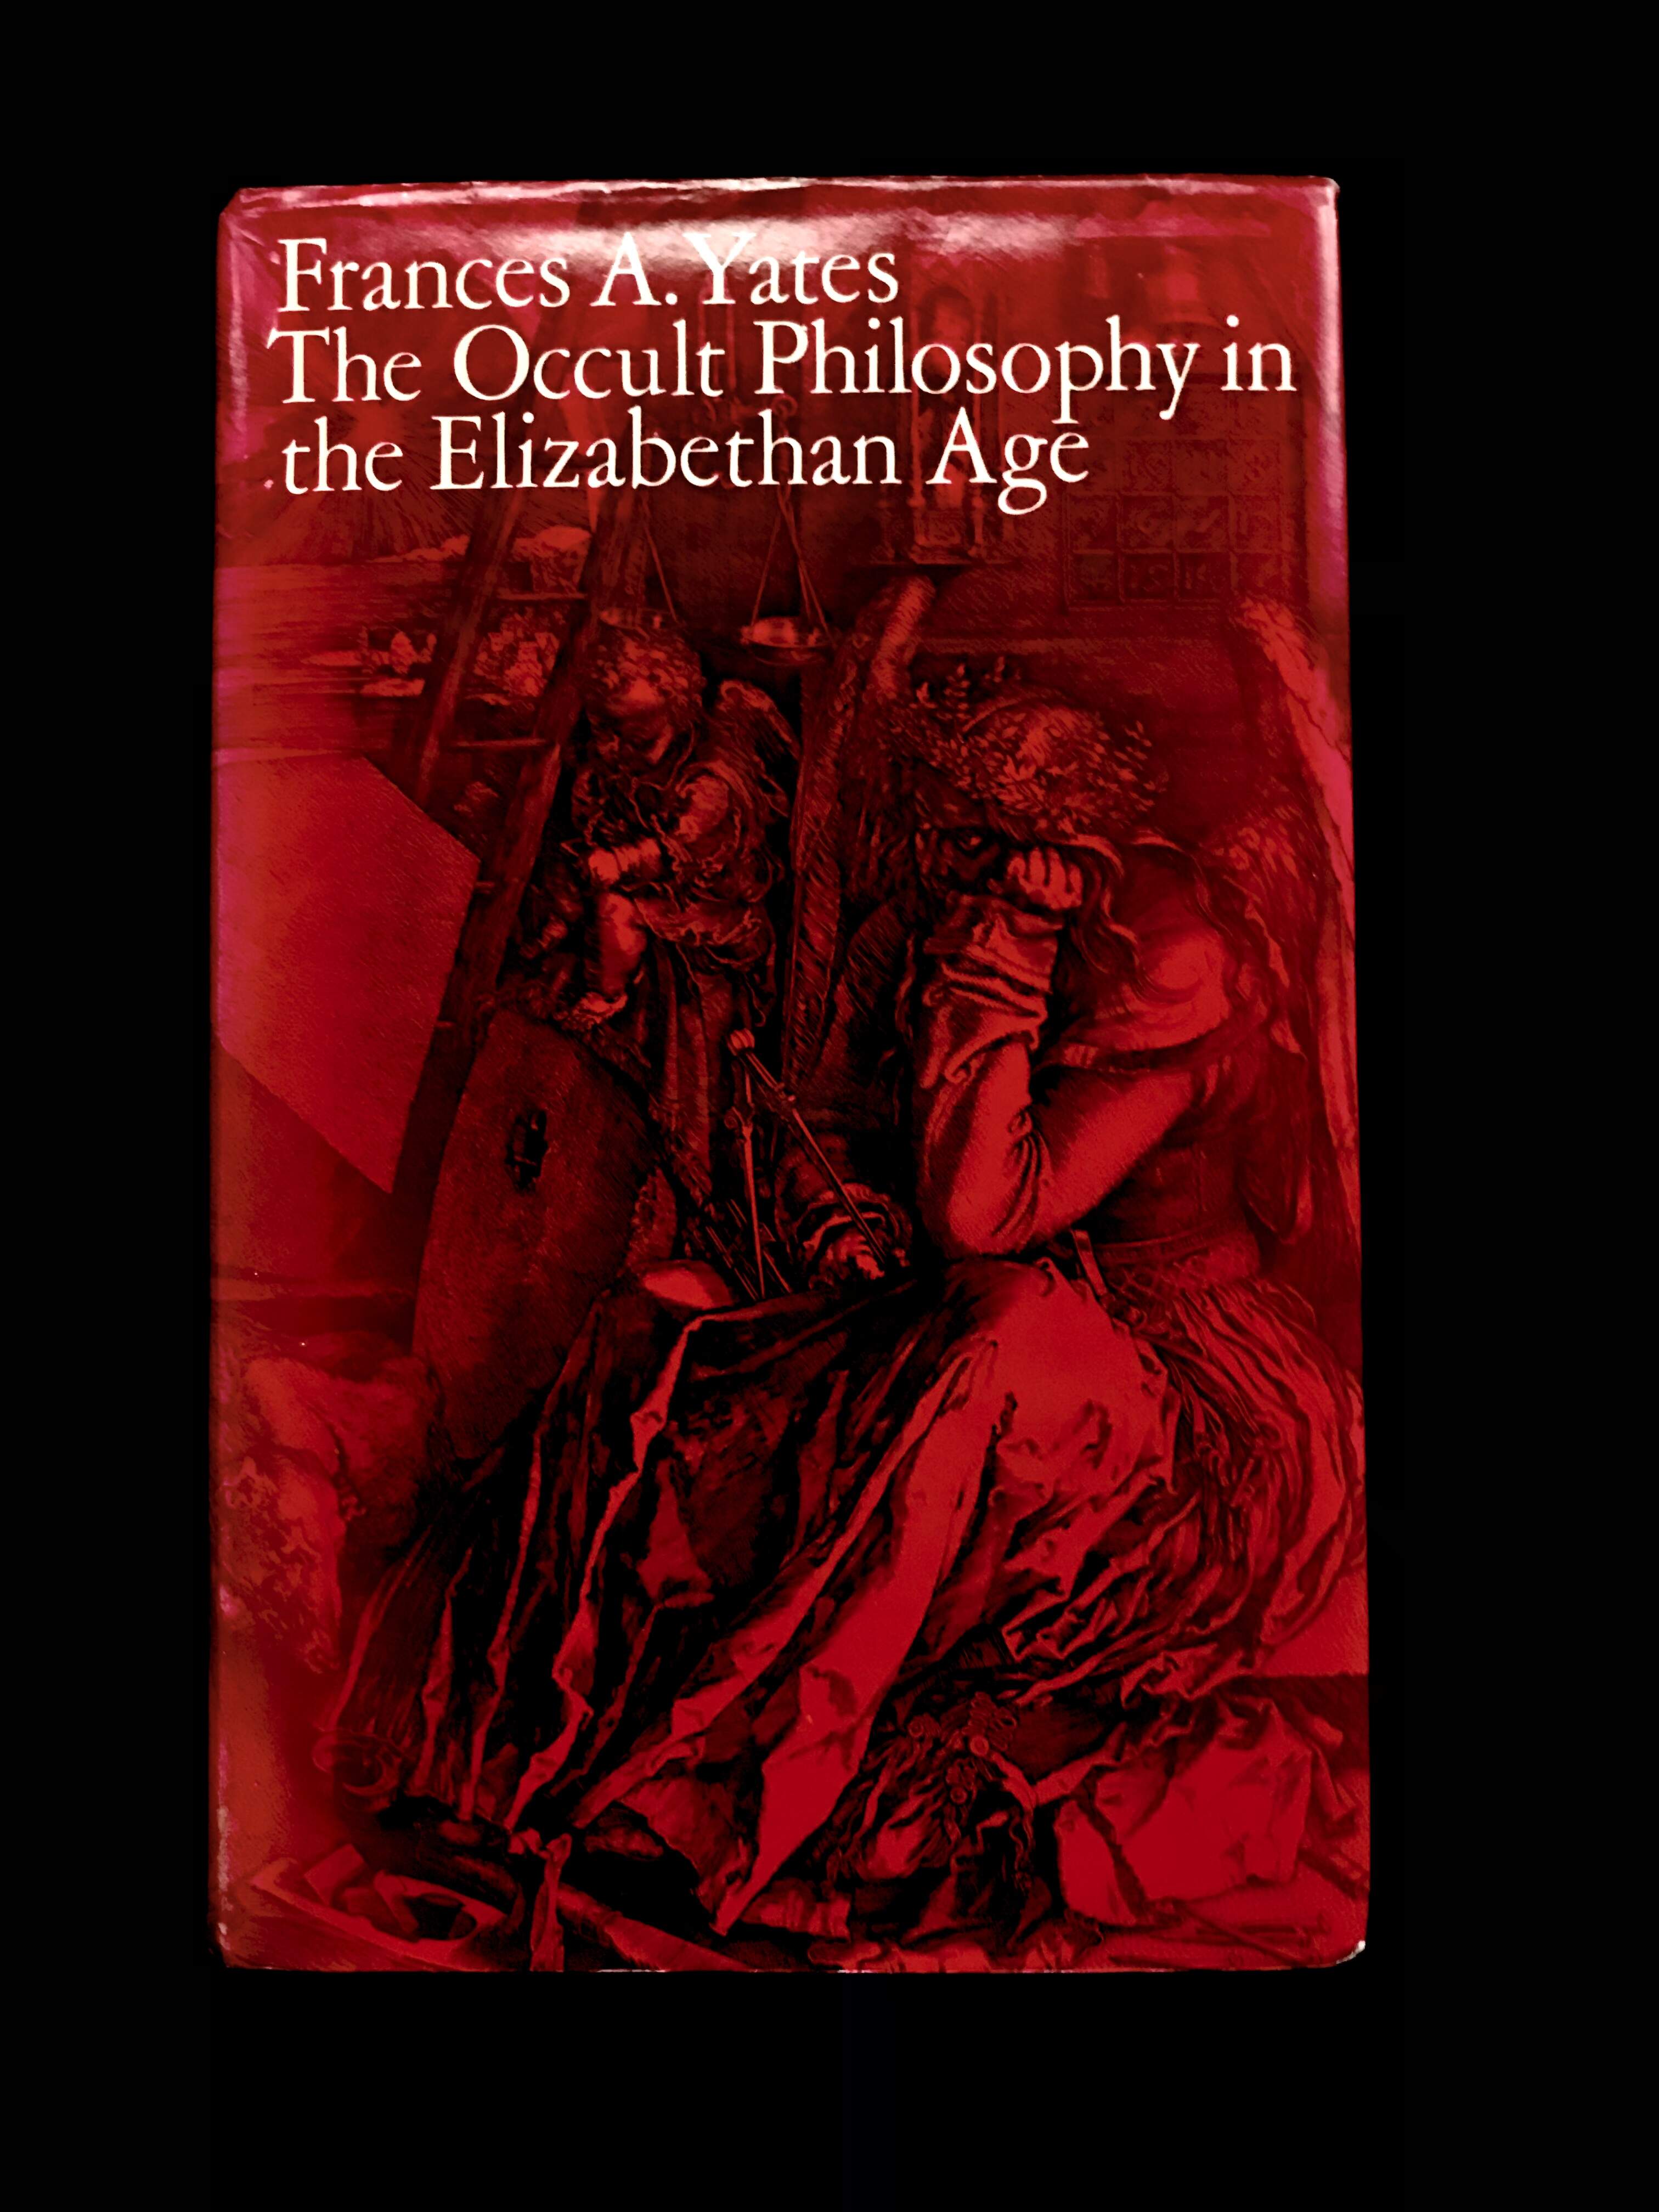 The Occult Philosophy In The Elizabethan Age by Frances A. Yates